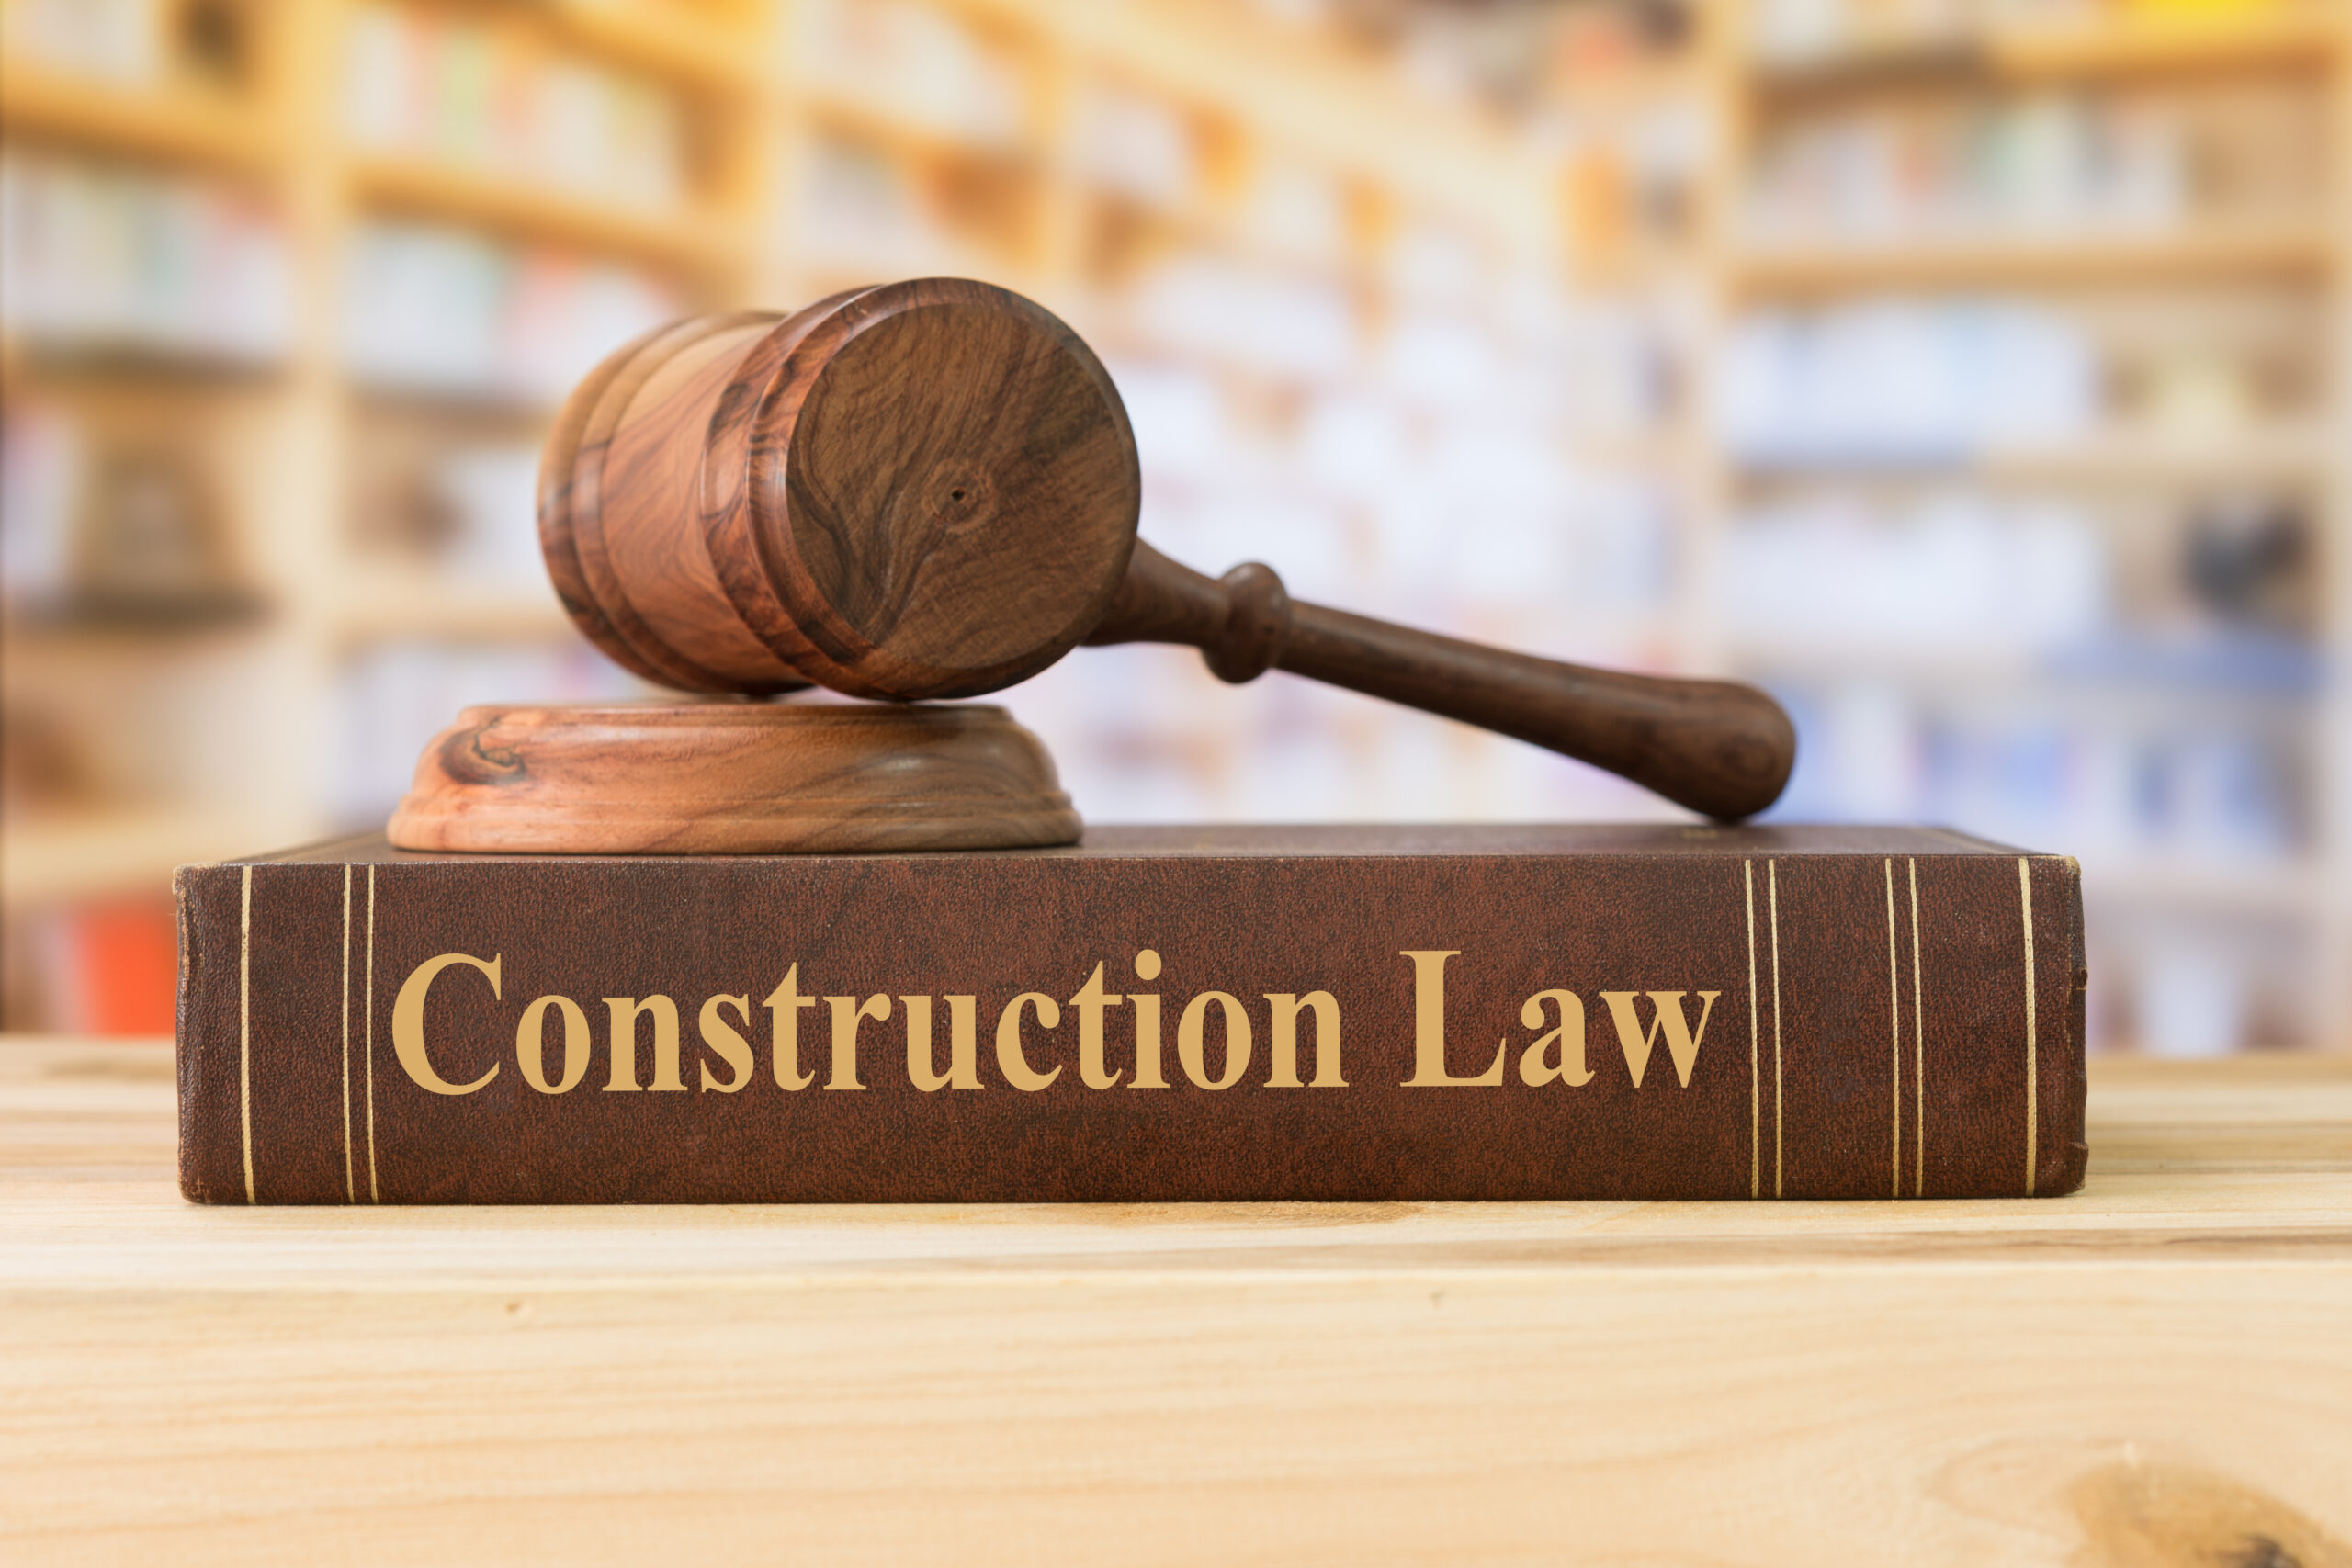 Construction lawyers